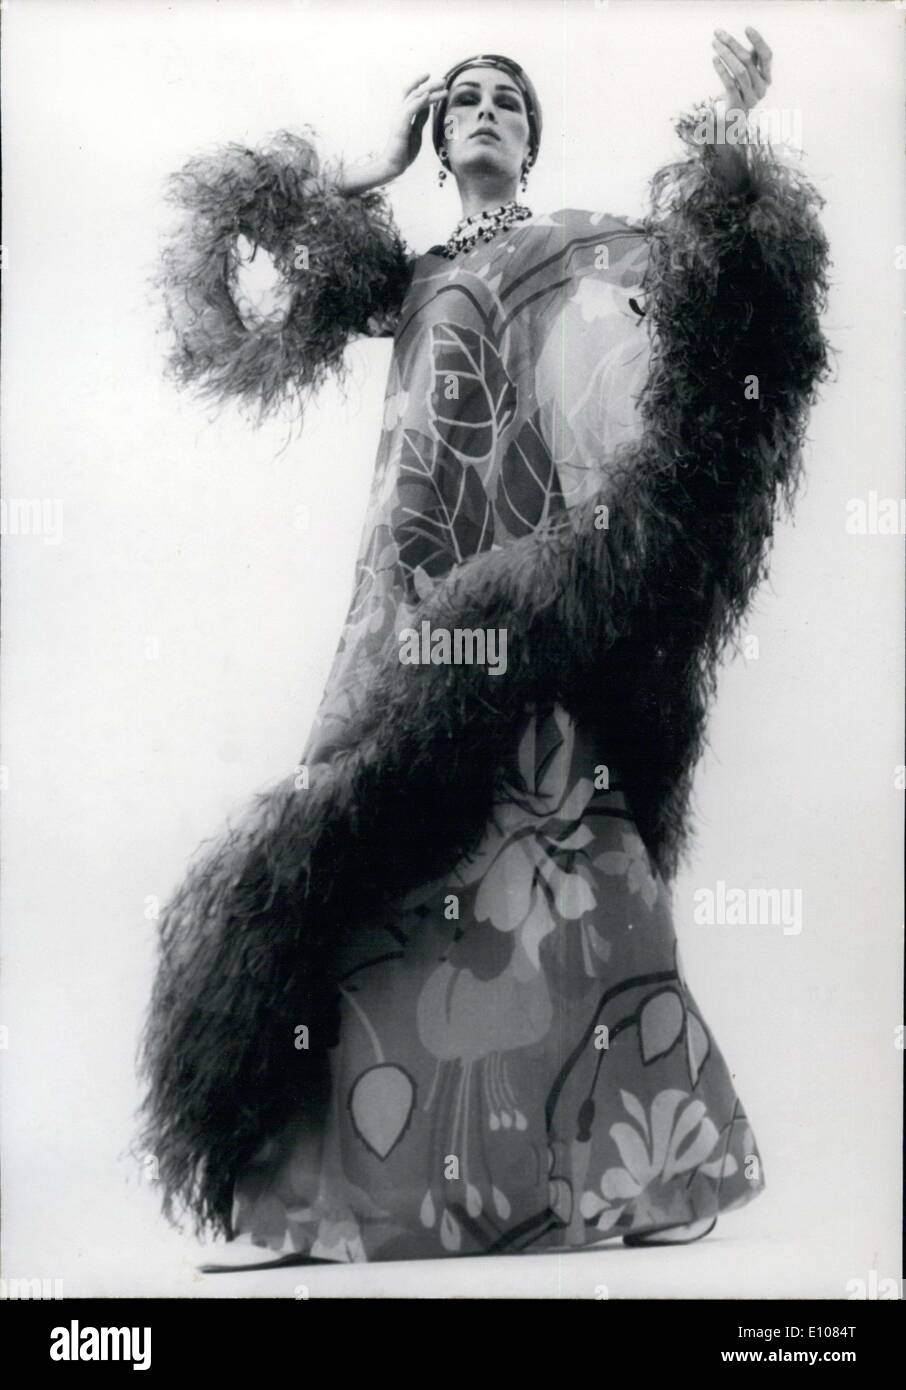 Feb. 11, 1970 - Pierre Balmain Printed Organza Dress with Ostrich Feathers  Stock Photo - Alamy